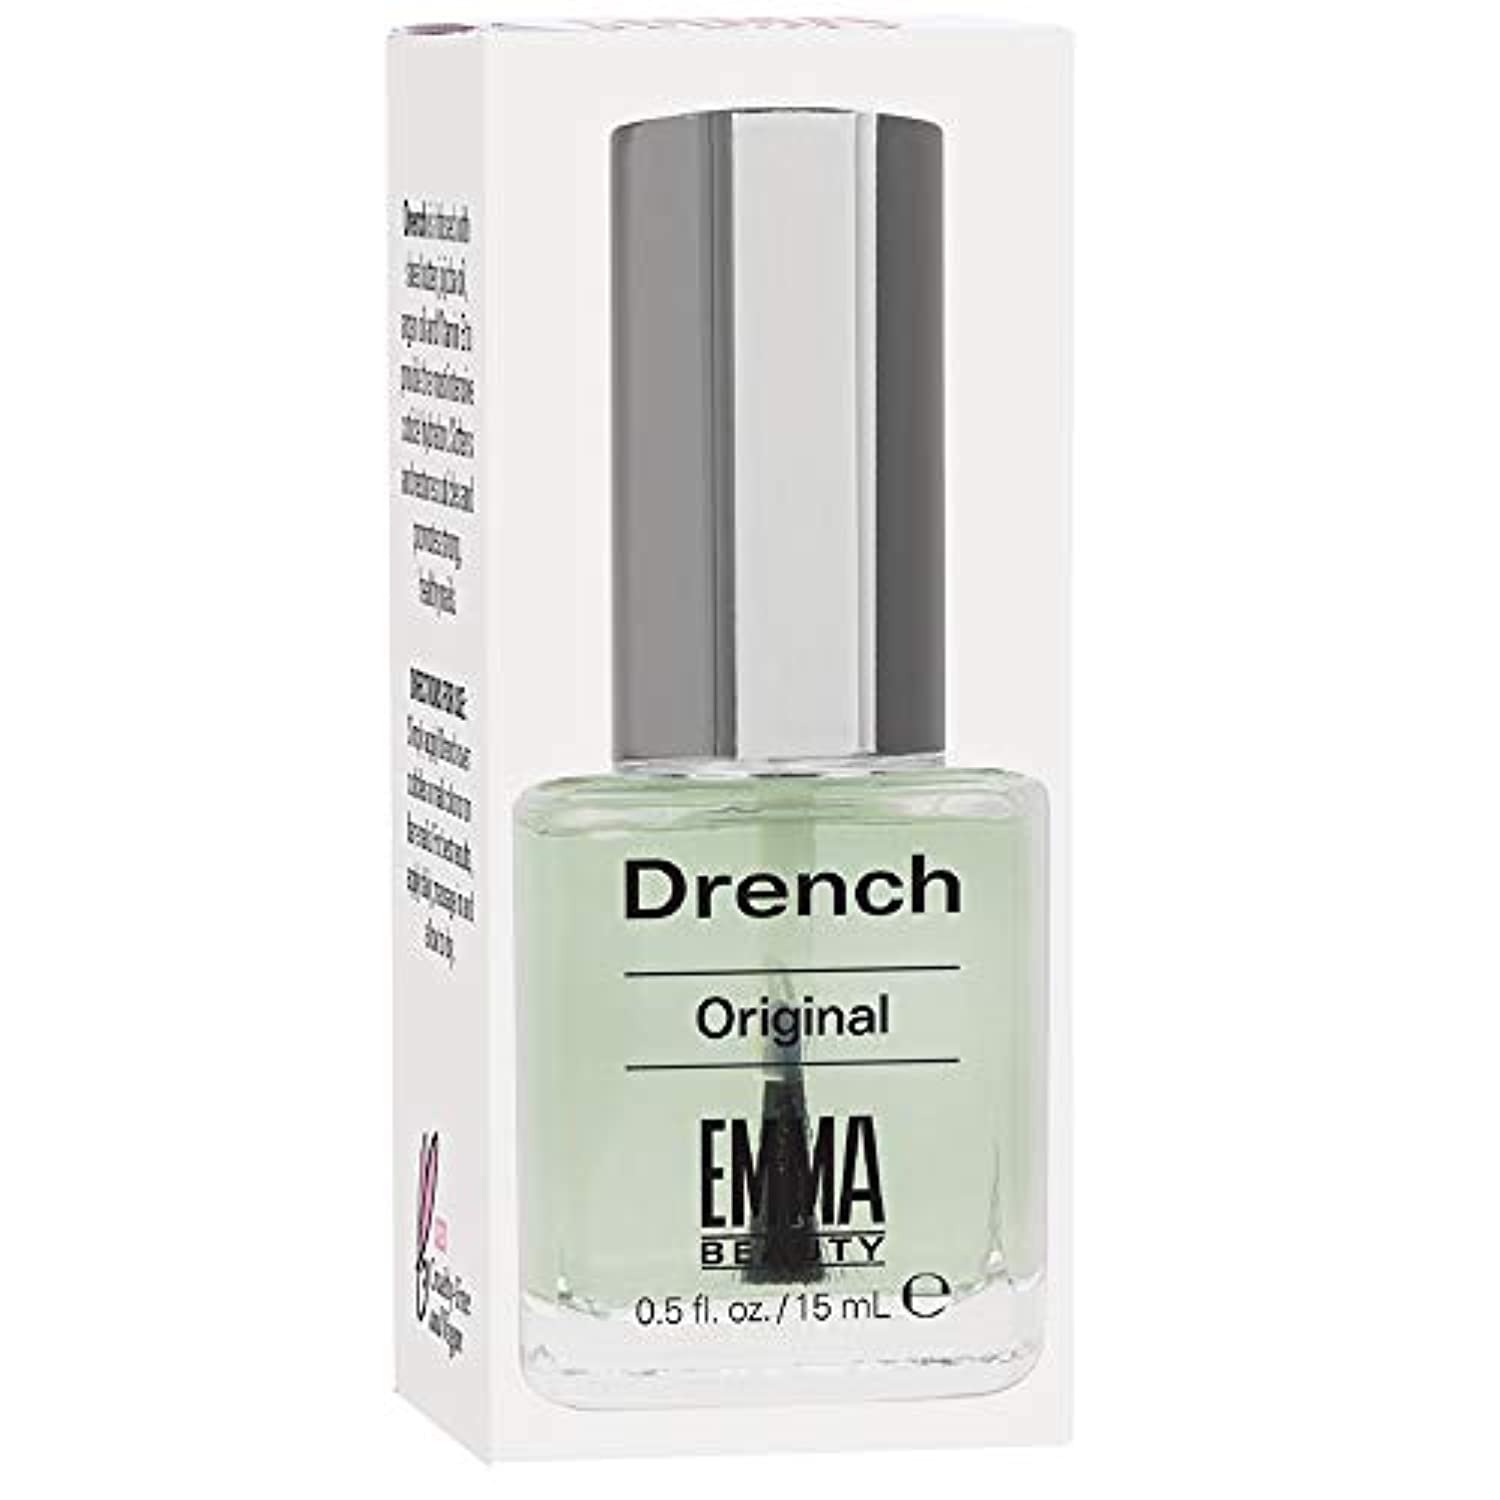 EMMA Beauty Drench Original Cuticle Oil, Deep Penetrating Oil Nourishes, Protects, Hydrates & Revitalizes Nails & Cuticles, 12+ Free Formula, 100% Vegan & Cruelty-Free, 0.5 fl. oz.